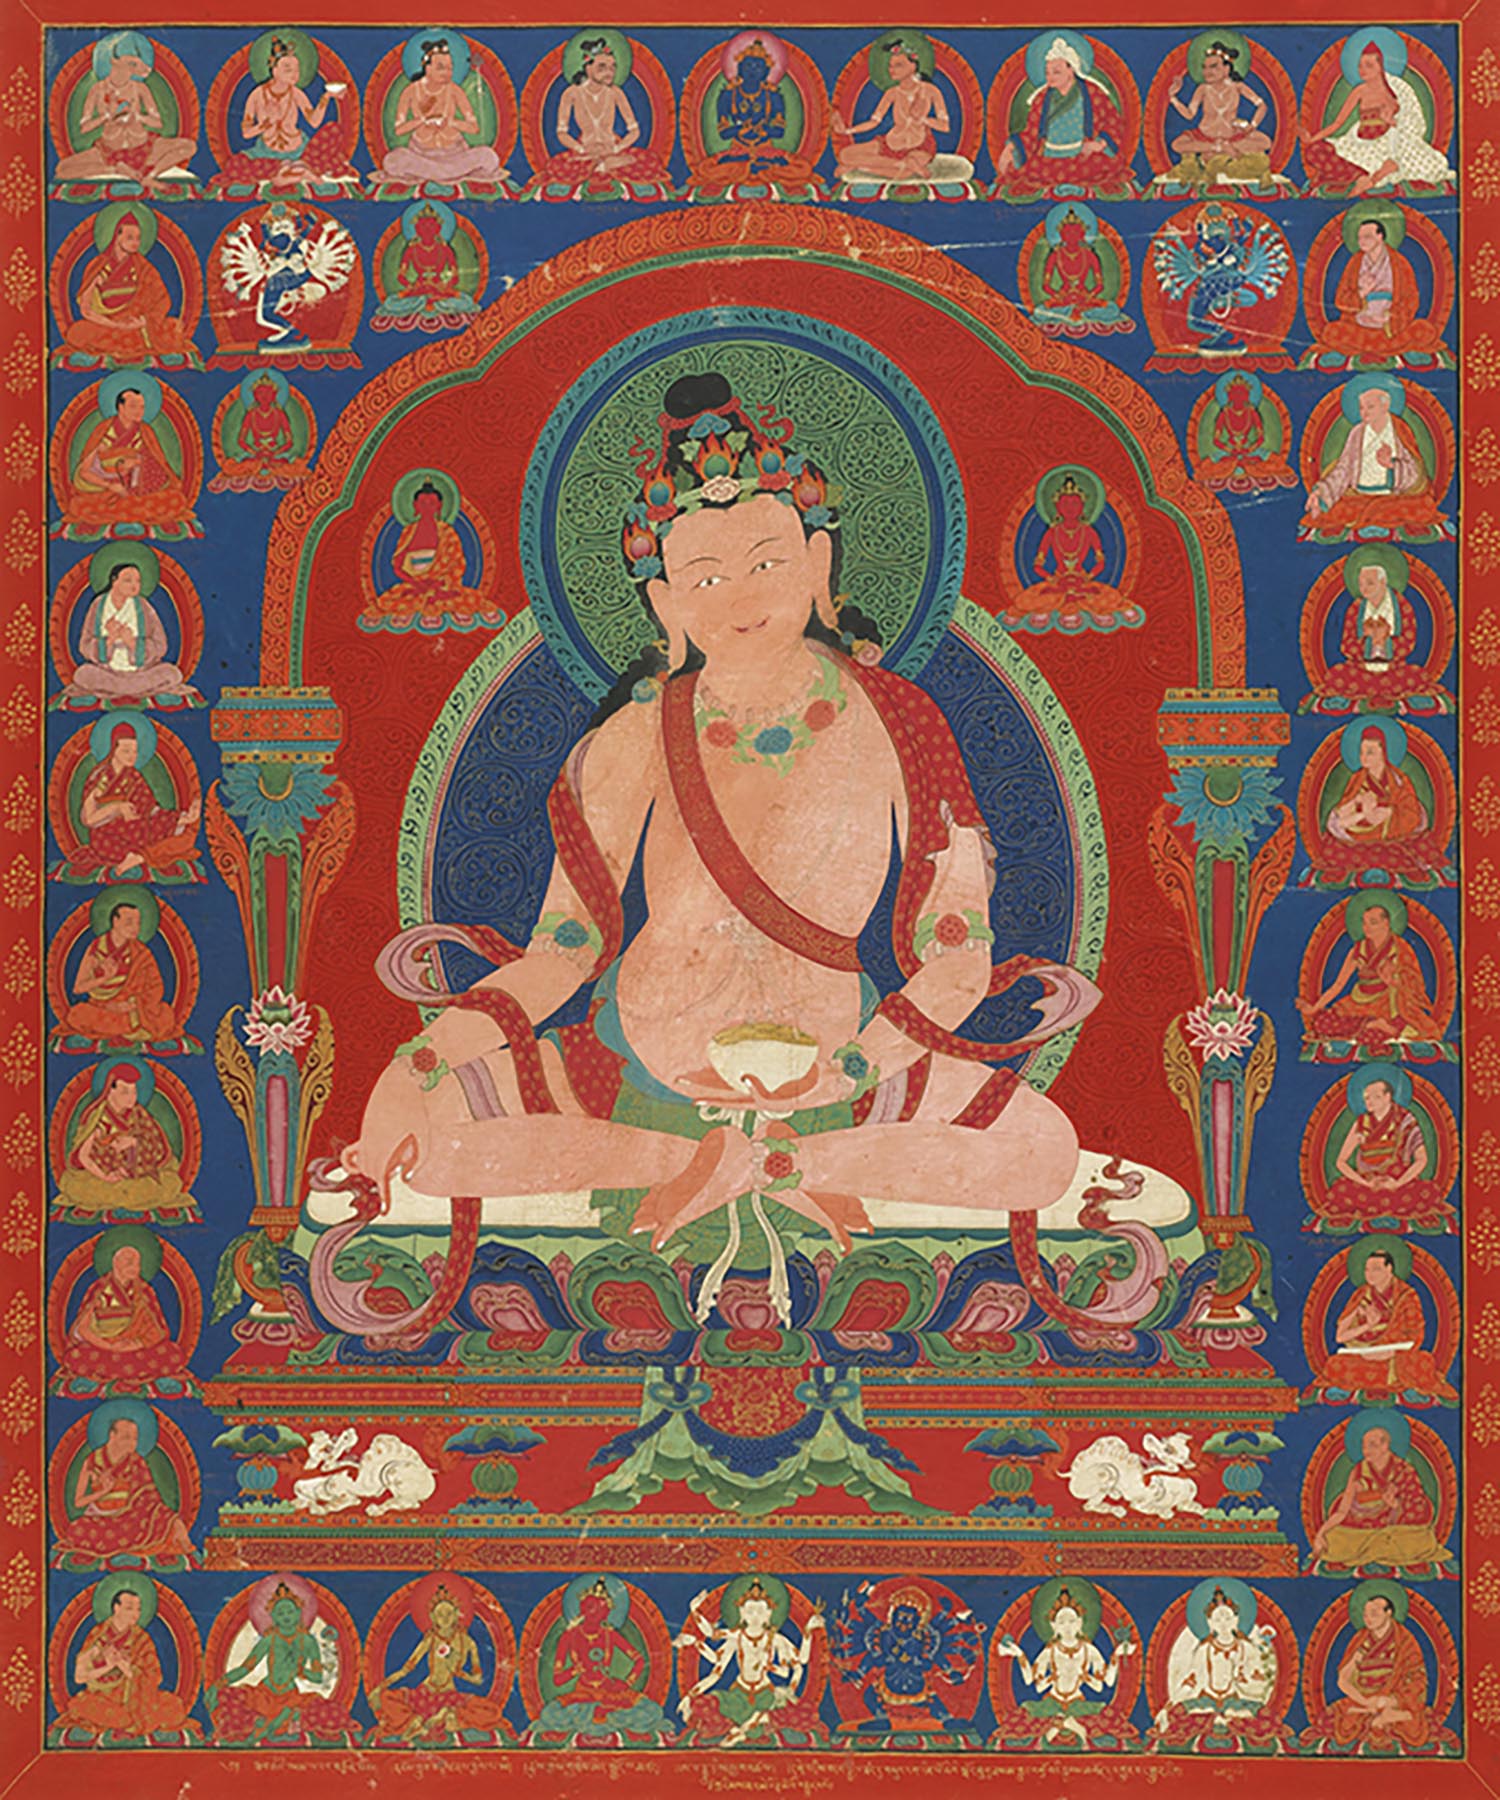 A Buddhist thangka depicting the Mahasiddha Avadhutipa surrounded by depictions of other spiritual and divine beings.